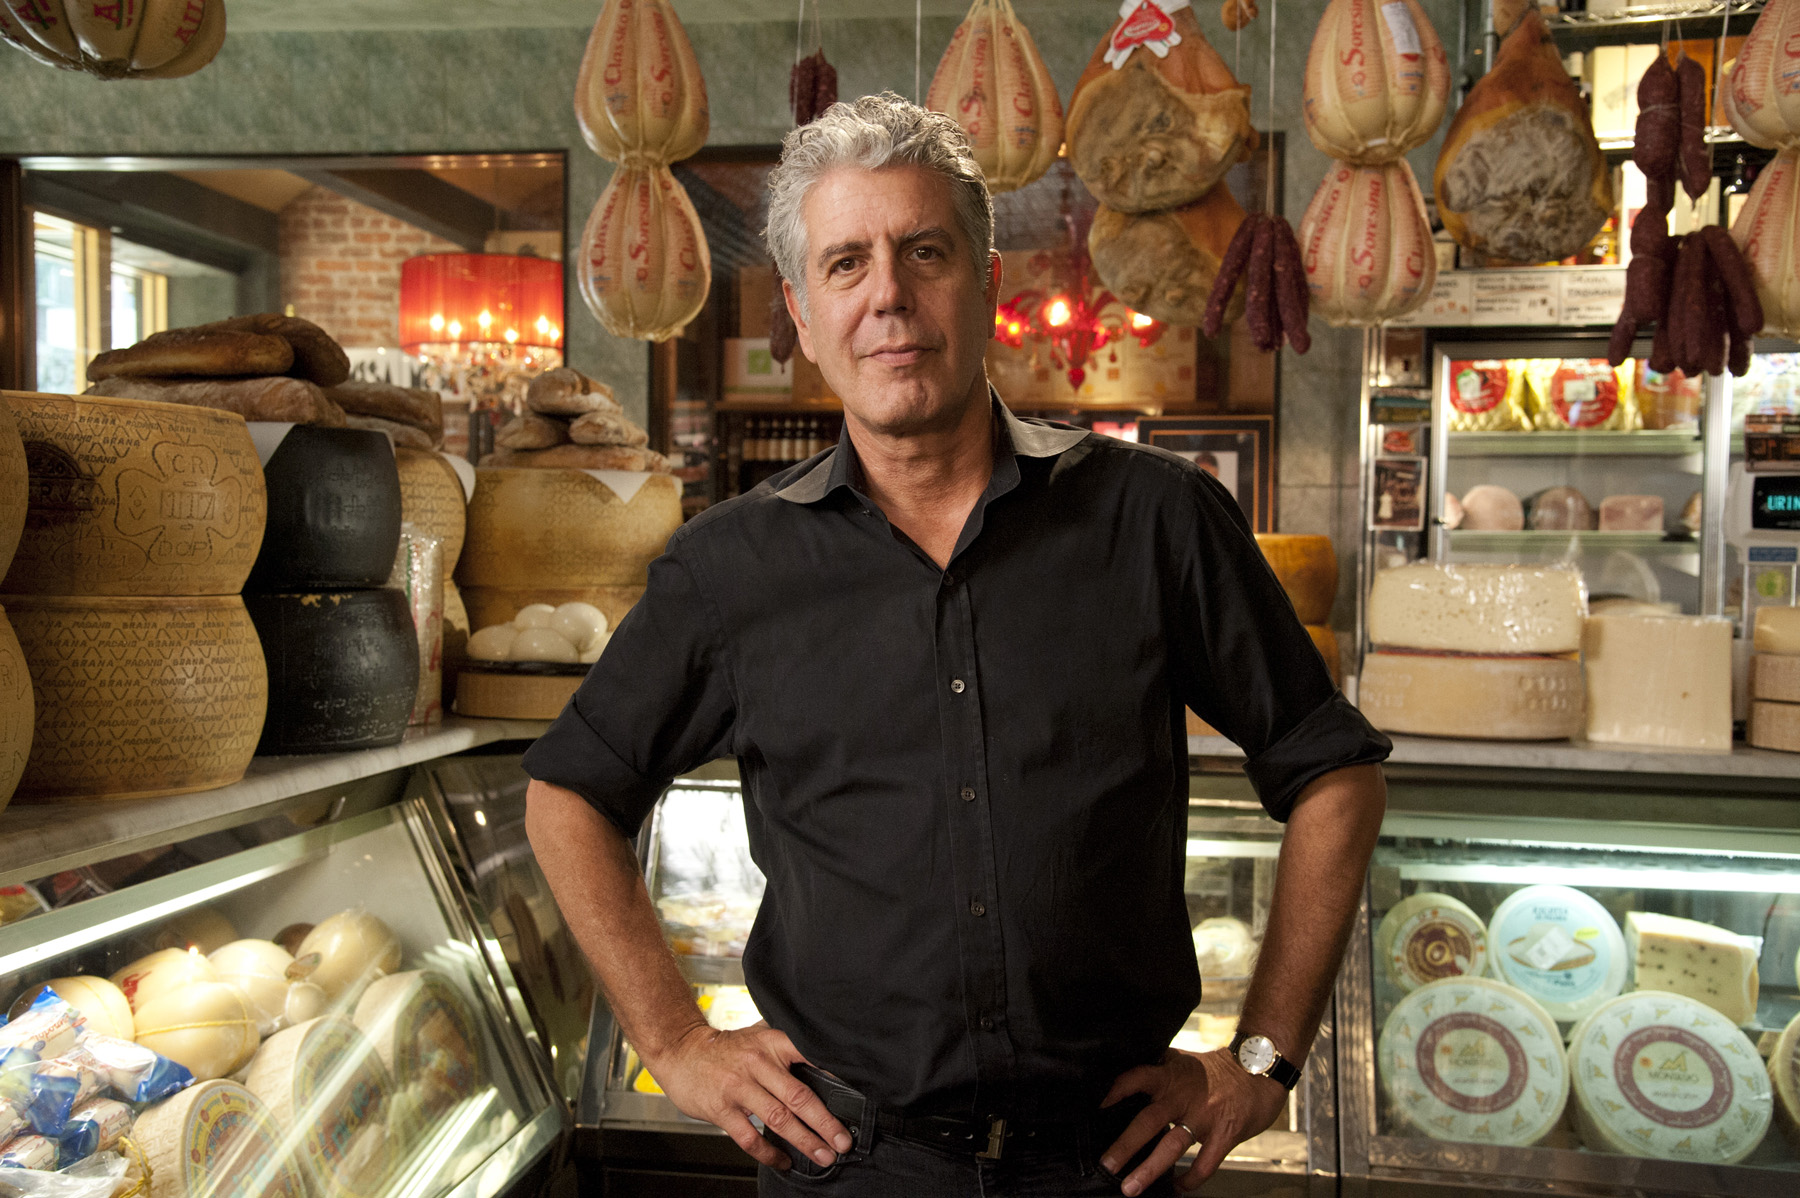 Anthony Bourdain is seen in a photo from the production of "Mob Week on AMC" in New York, NY on June 22, 2012. David E. Steele/AMC